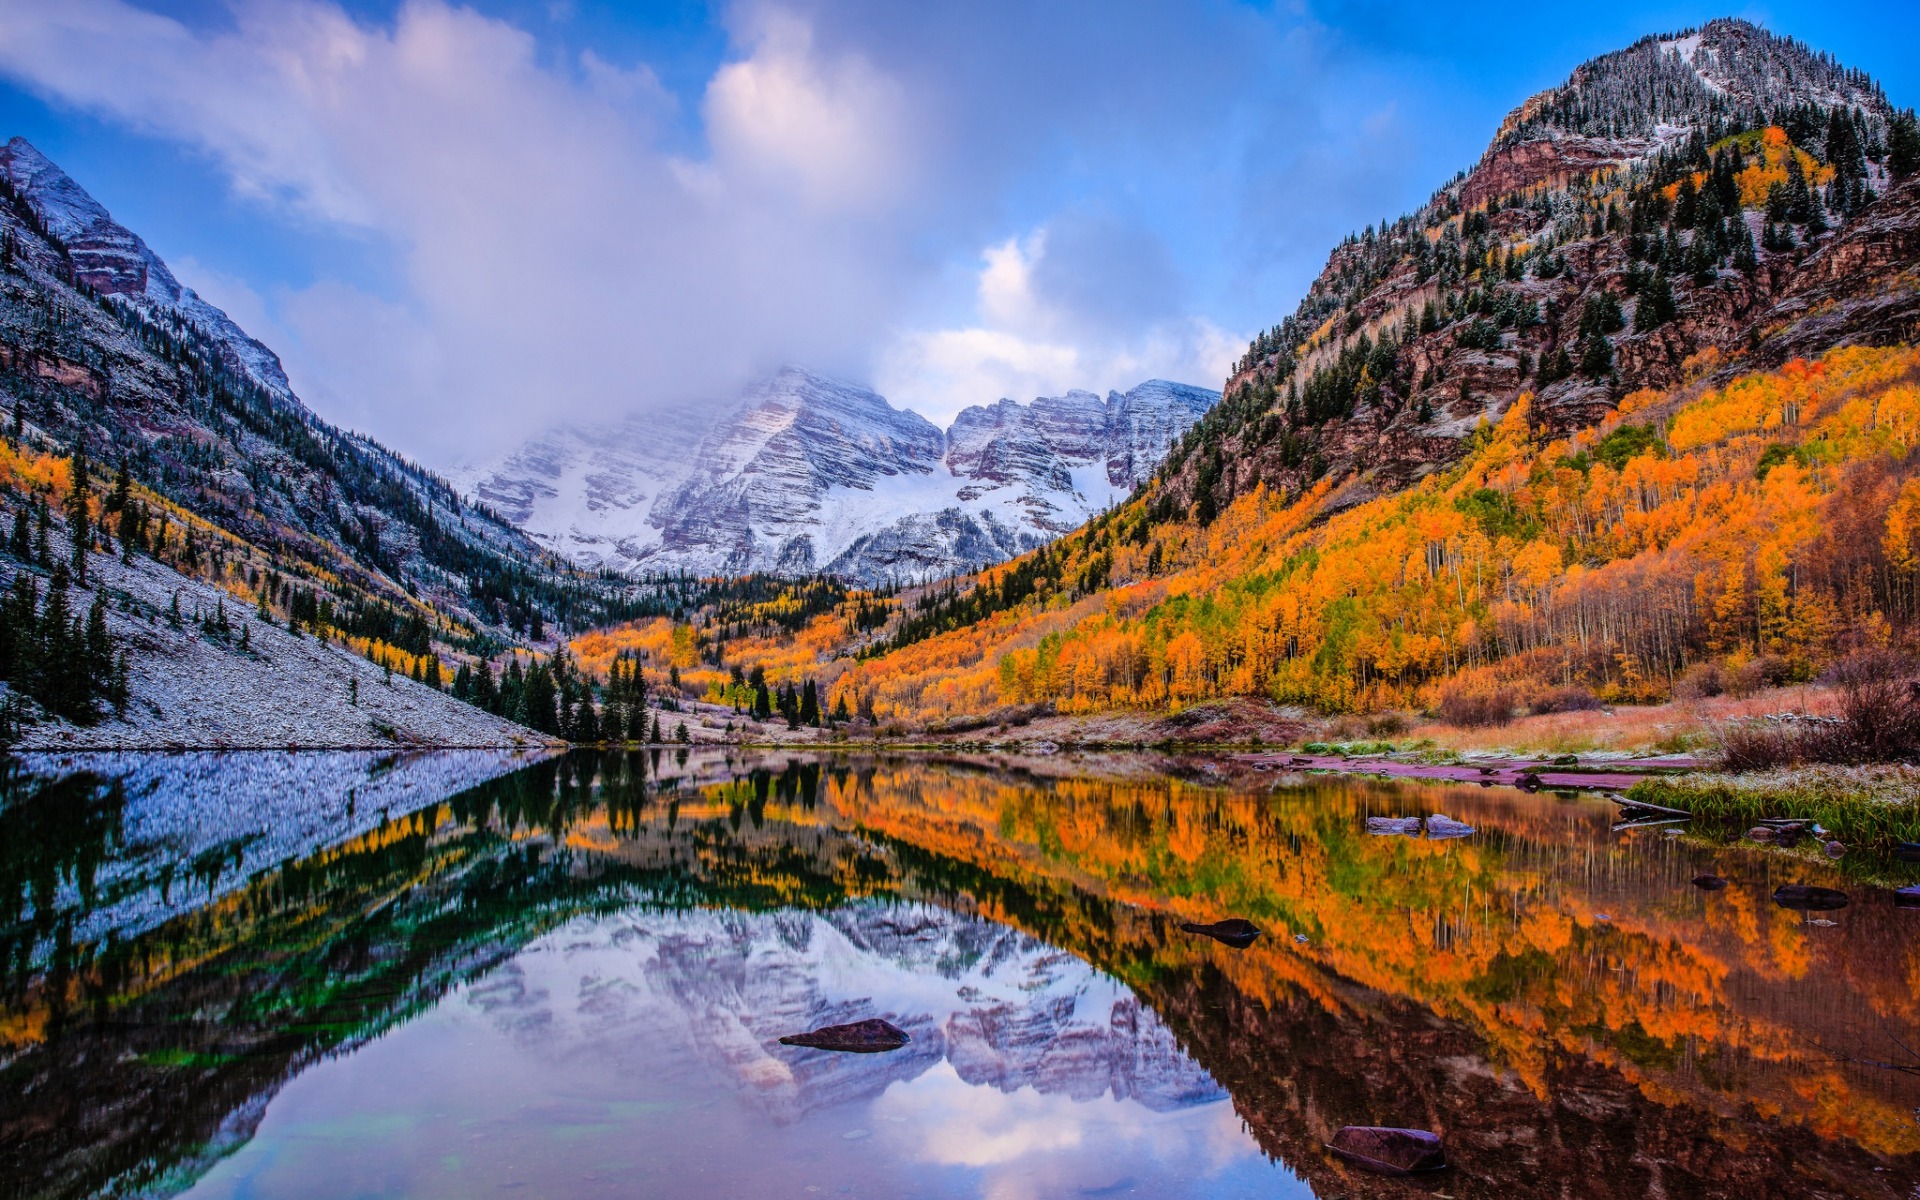 Download wallpaper Maroon Bells, mountain lake, autumn, mountains, Aspen, Colorado, USA, North Maroon Peak, Maroon Peak for desktop with resolution 1920x1200. High Quality HD picture wallpaper